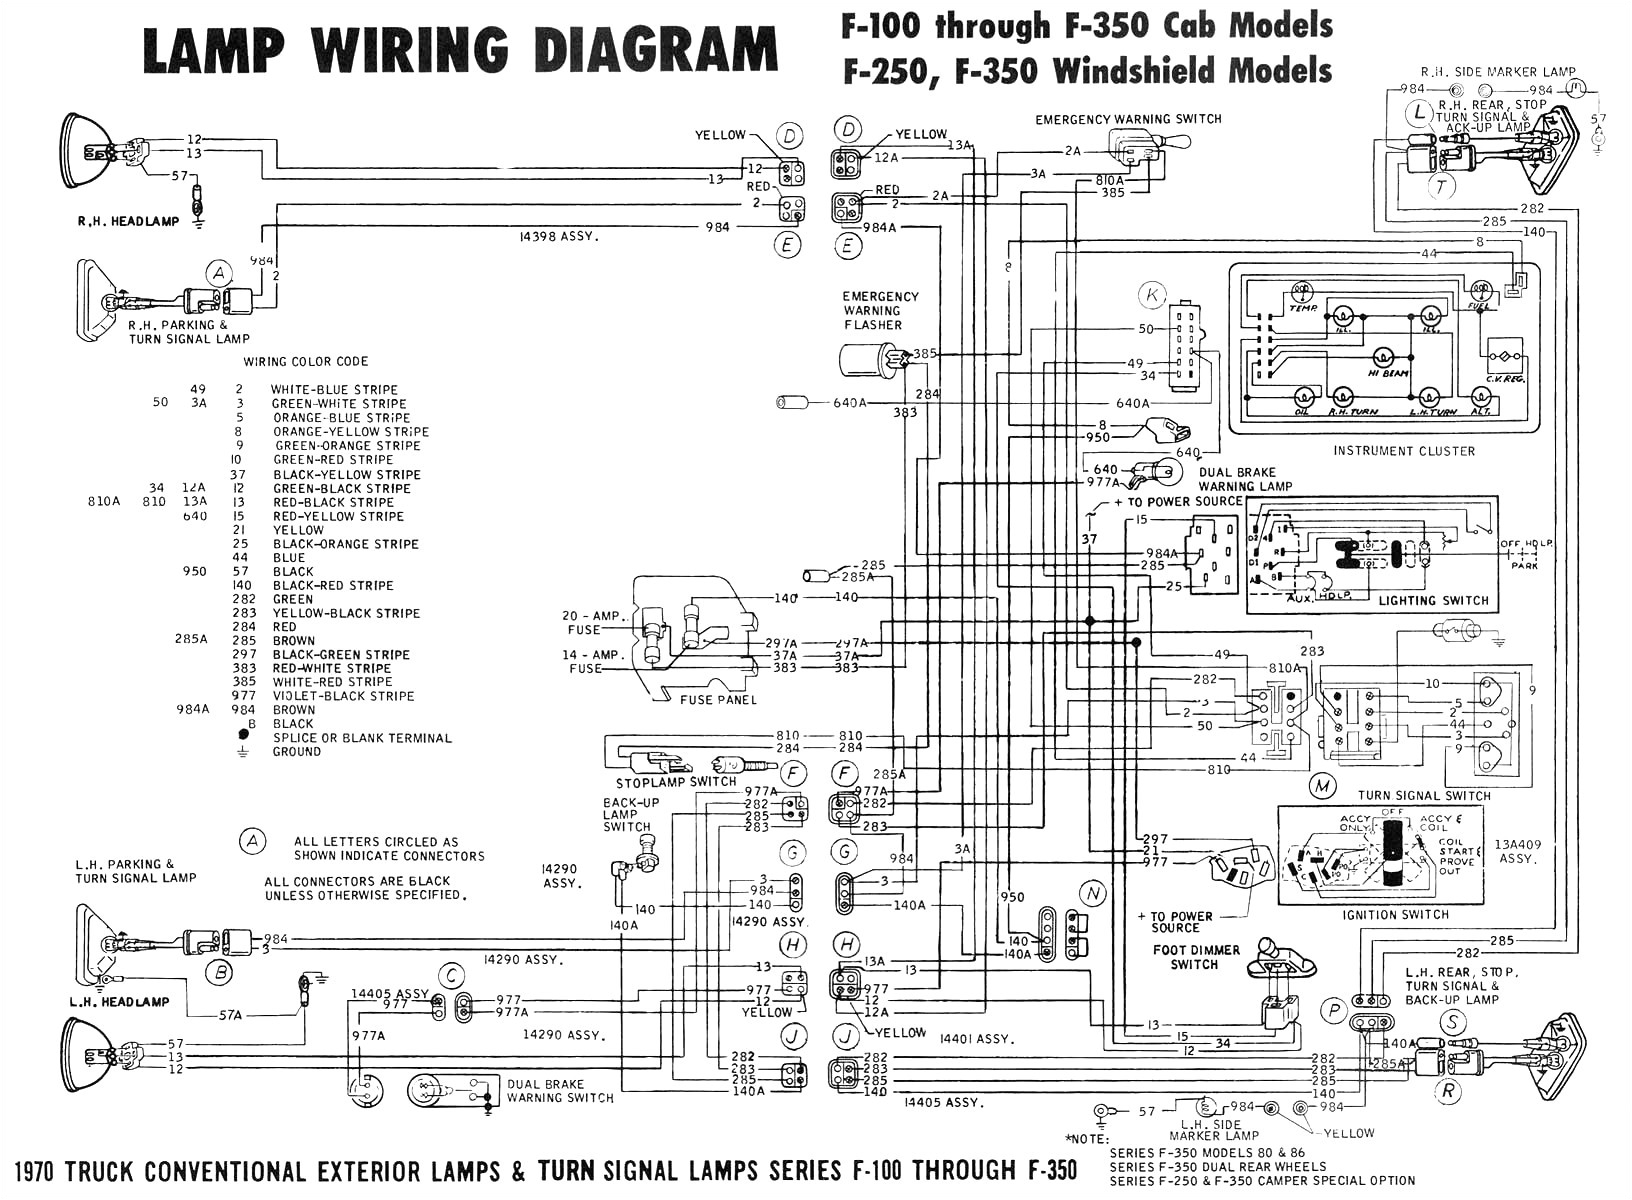 wiring diagram likewise 2013 camaro factory location also 2012 2000 ford f 150 fuse diagram likewise